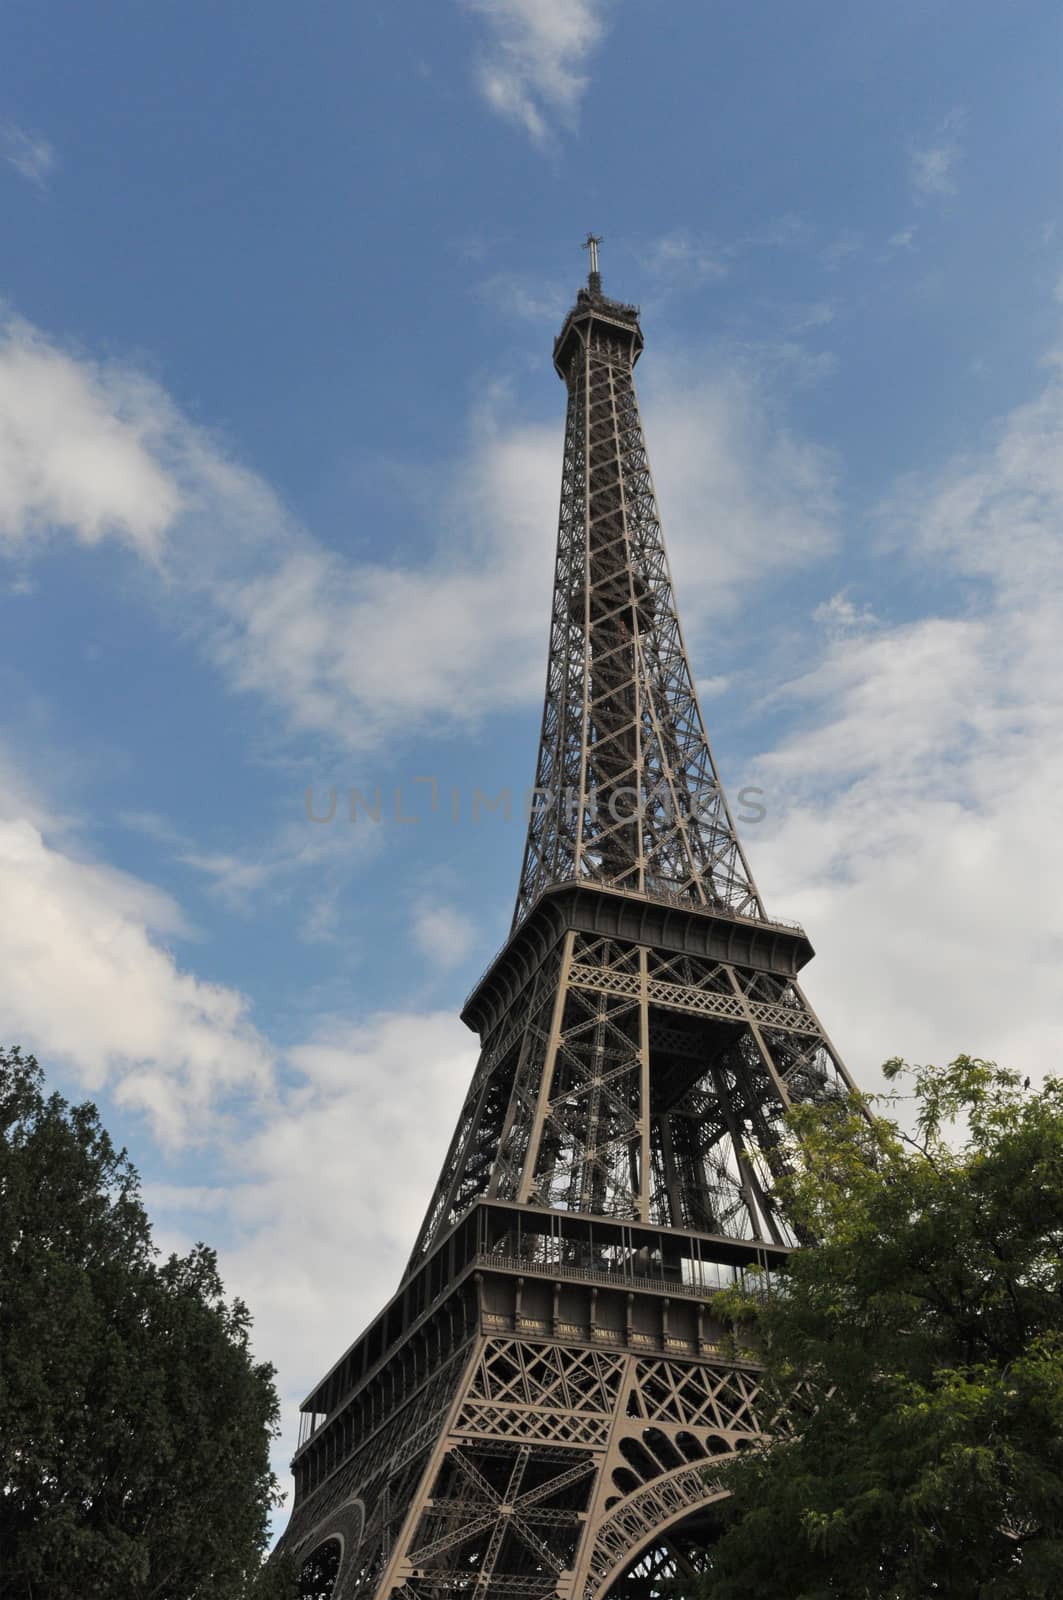 Eiffel Tower in Paris with a Blue Sky by shkyo30